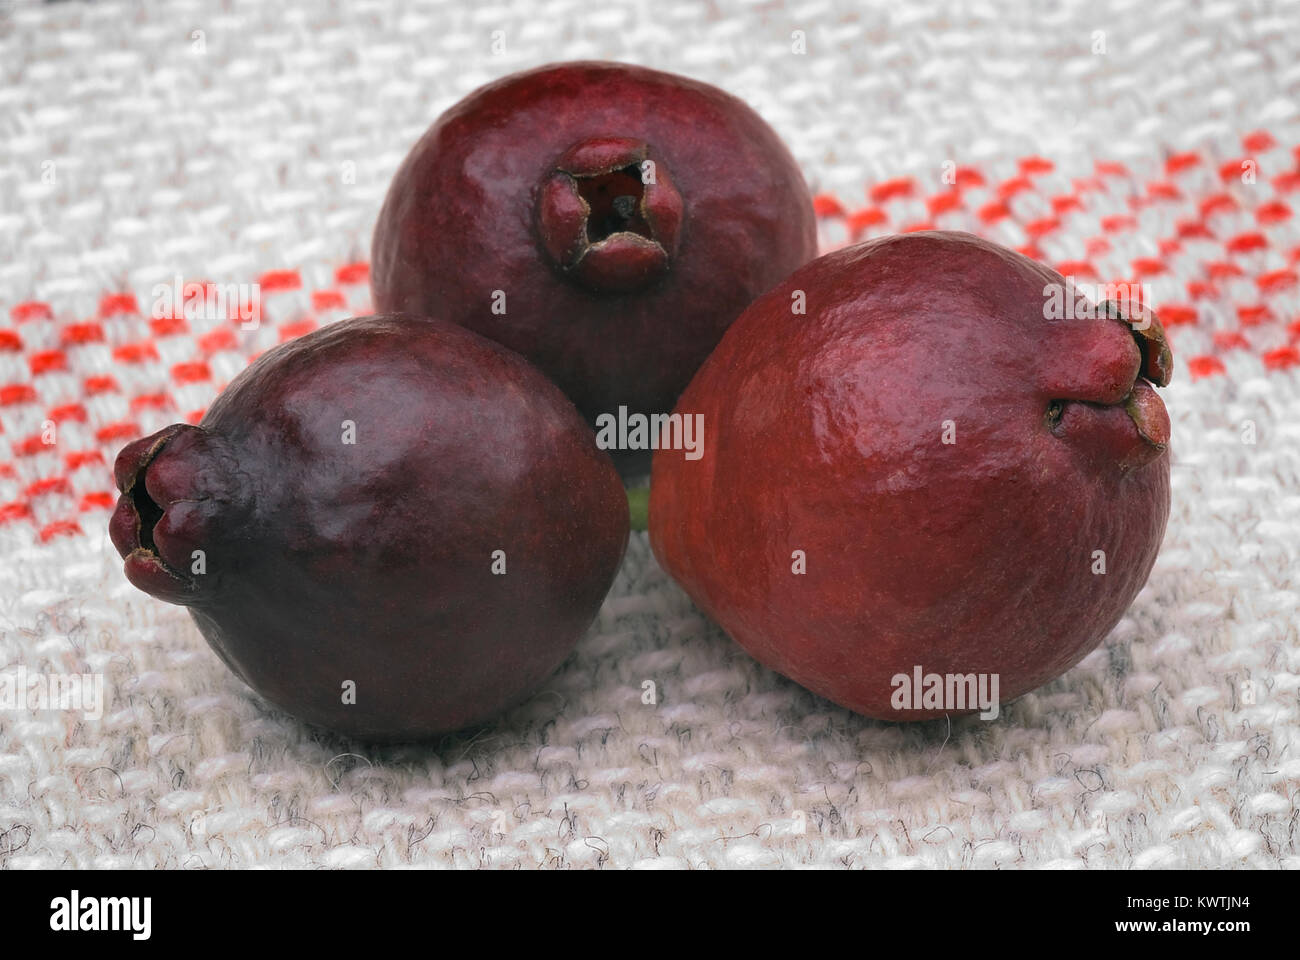 Cattley guava (Psidium littorale subsp. longipes) or Peruvian guava or Red Cherry Guava or Strawberry guava or Psidium cattleianum or Psidium chinense Stock Photo